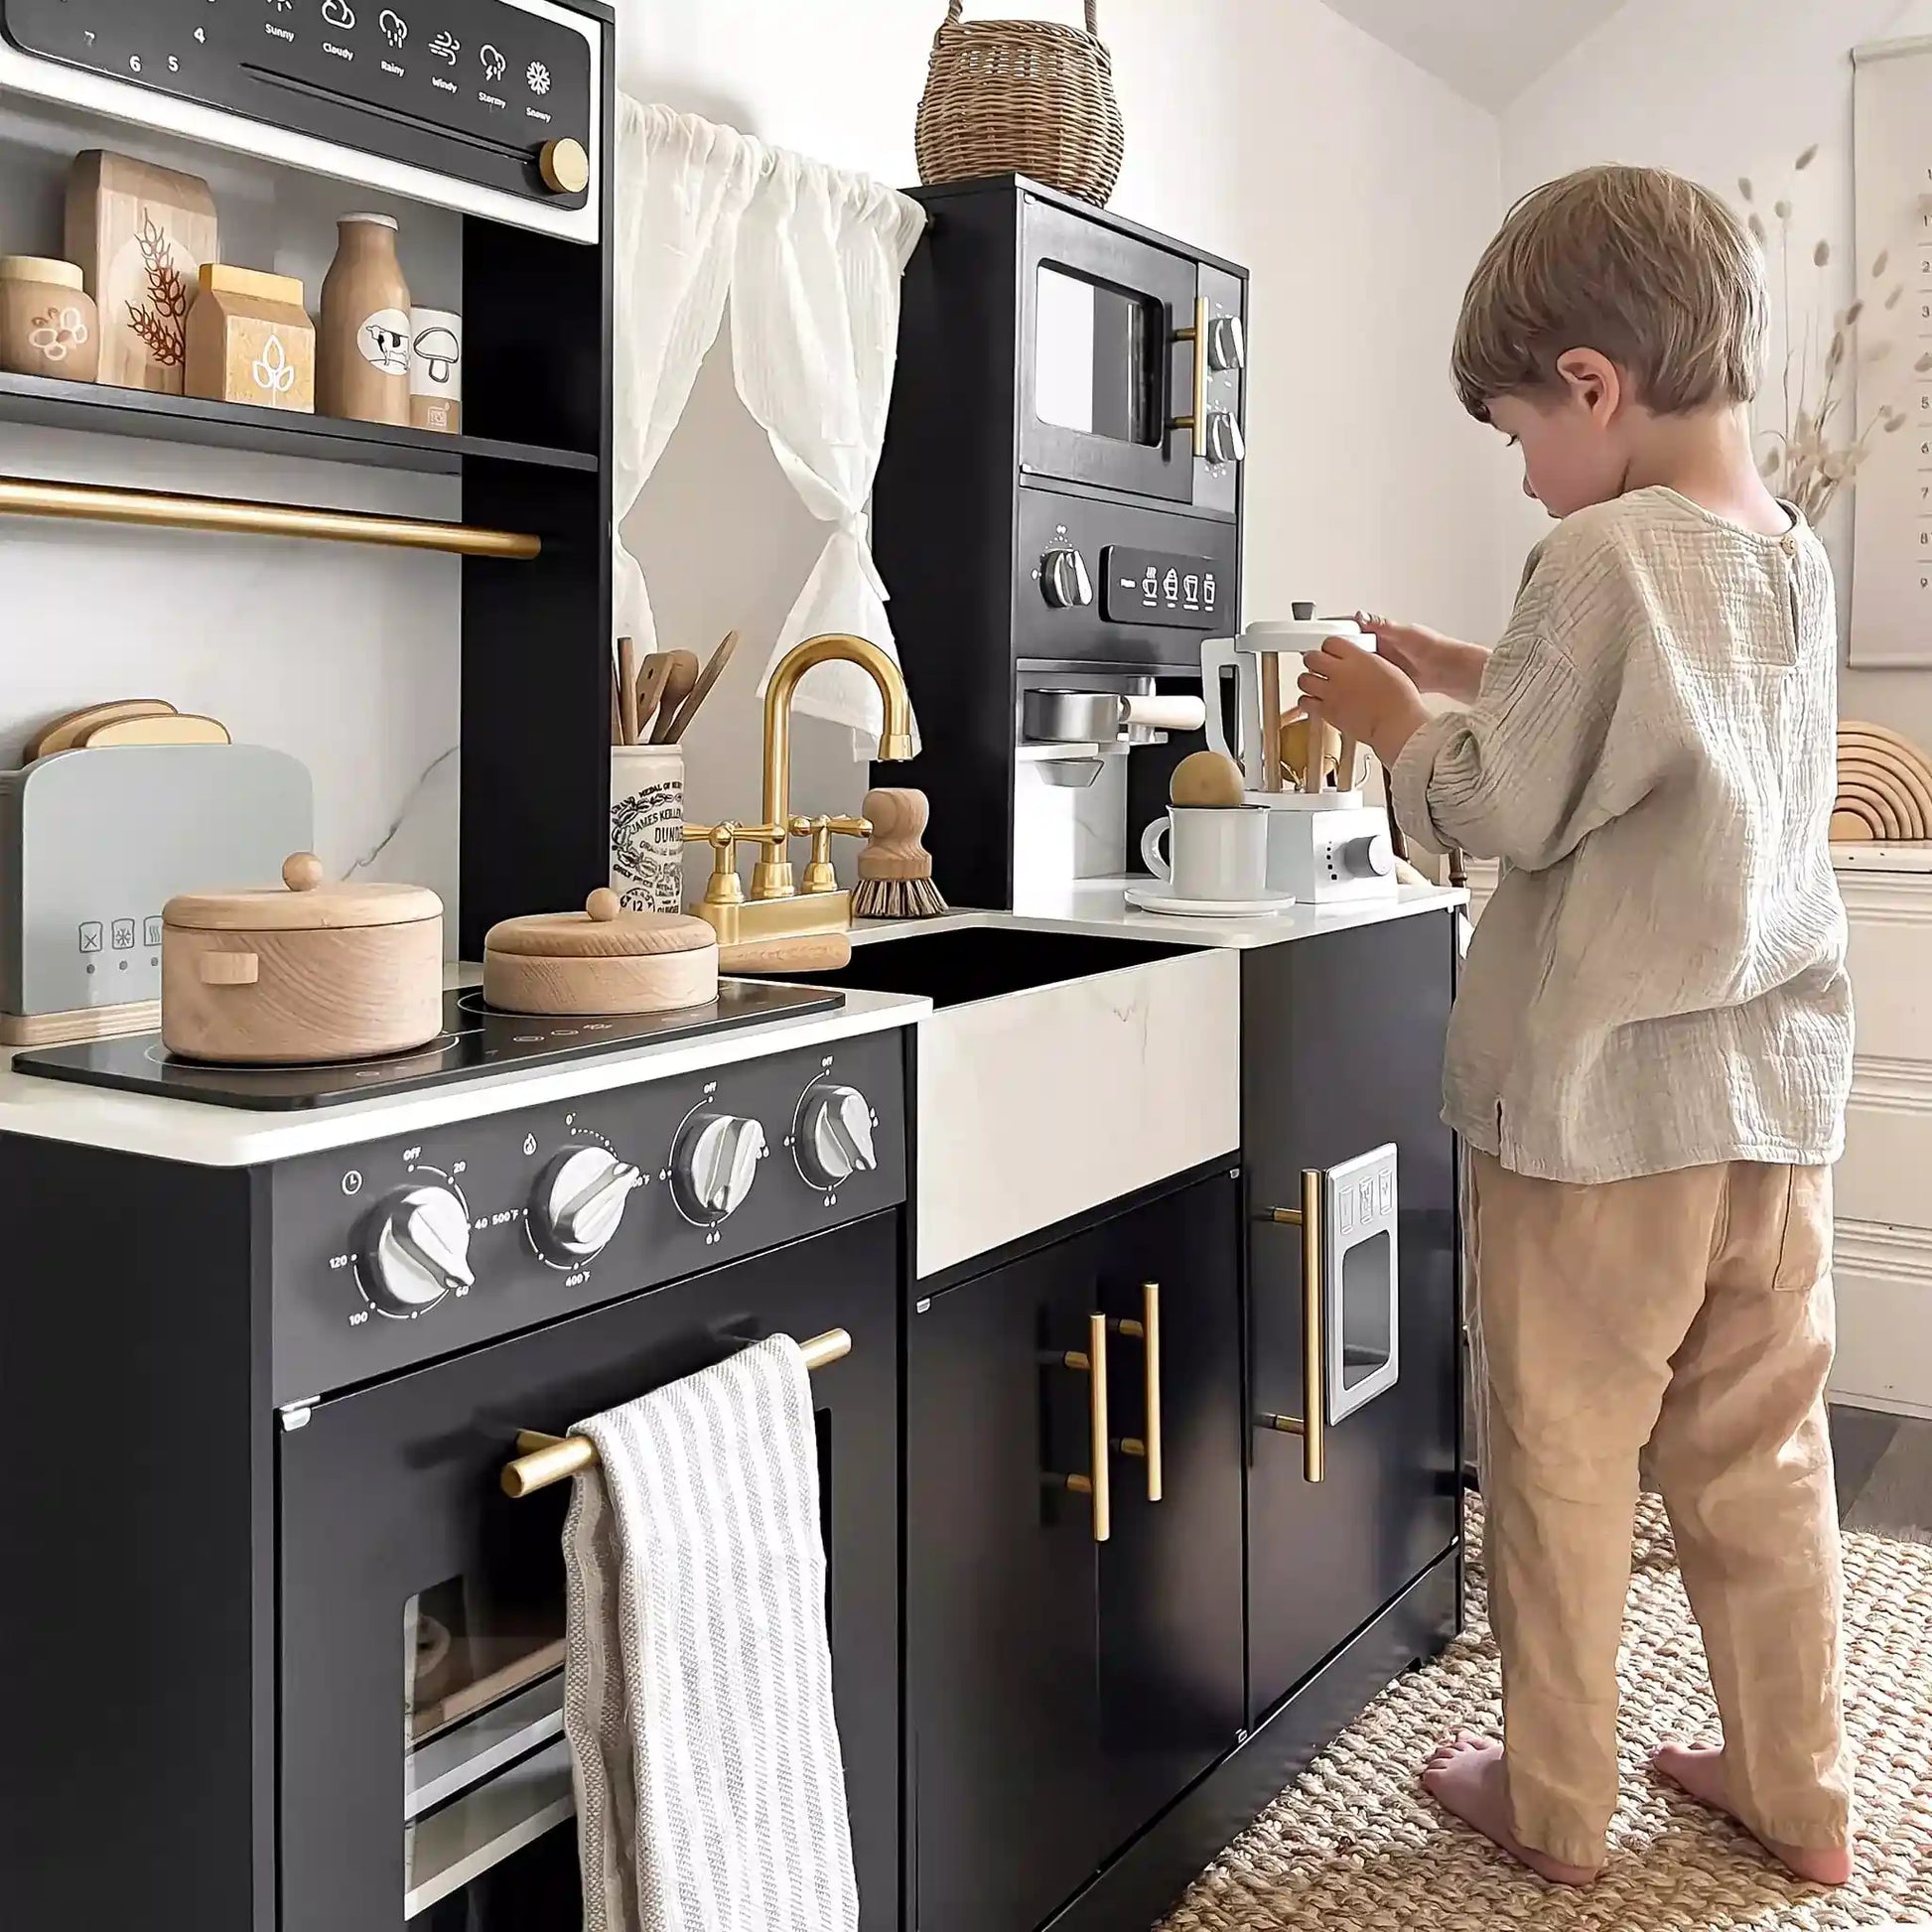 Tiny Land® Trendy Home Style Play Kitchen